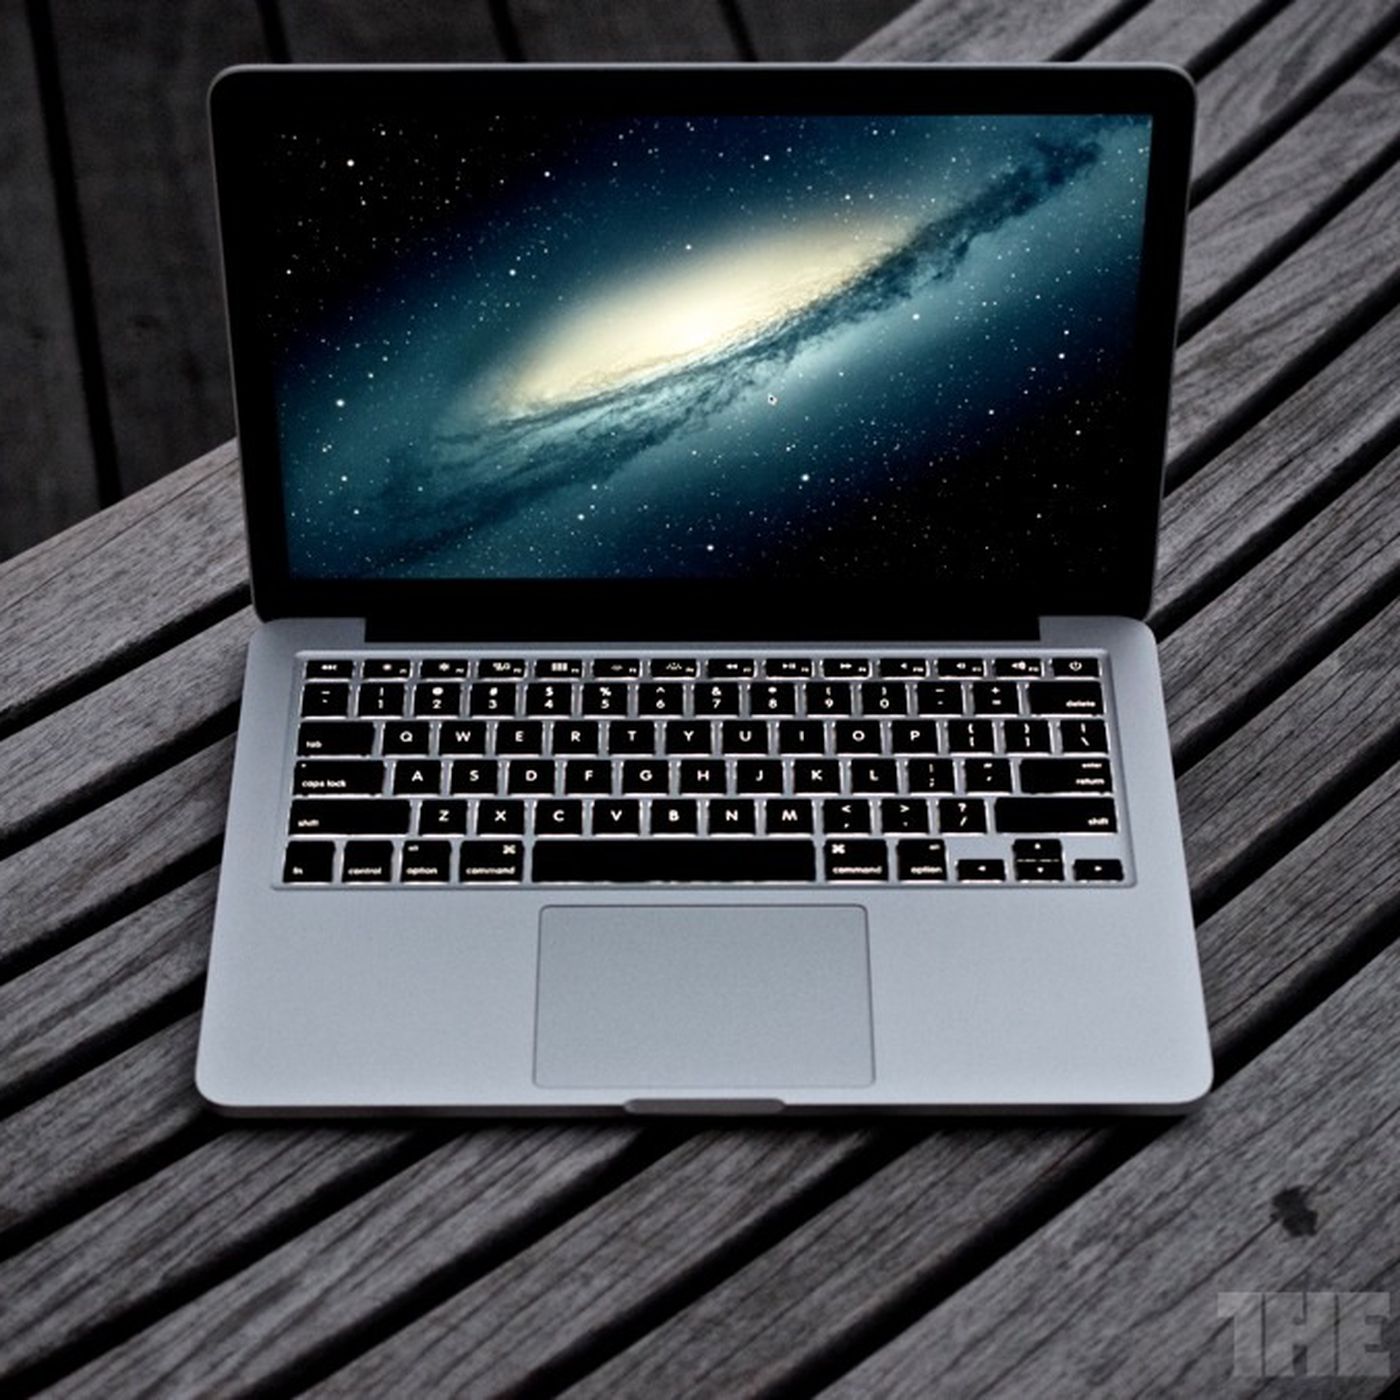 Fundament vulkansk fisk 13-inch MacBook Pro with Retina display review - The Verge